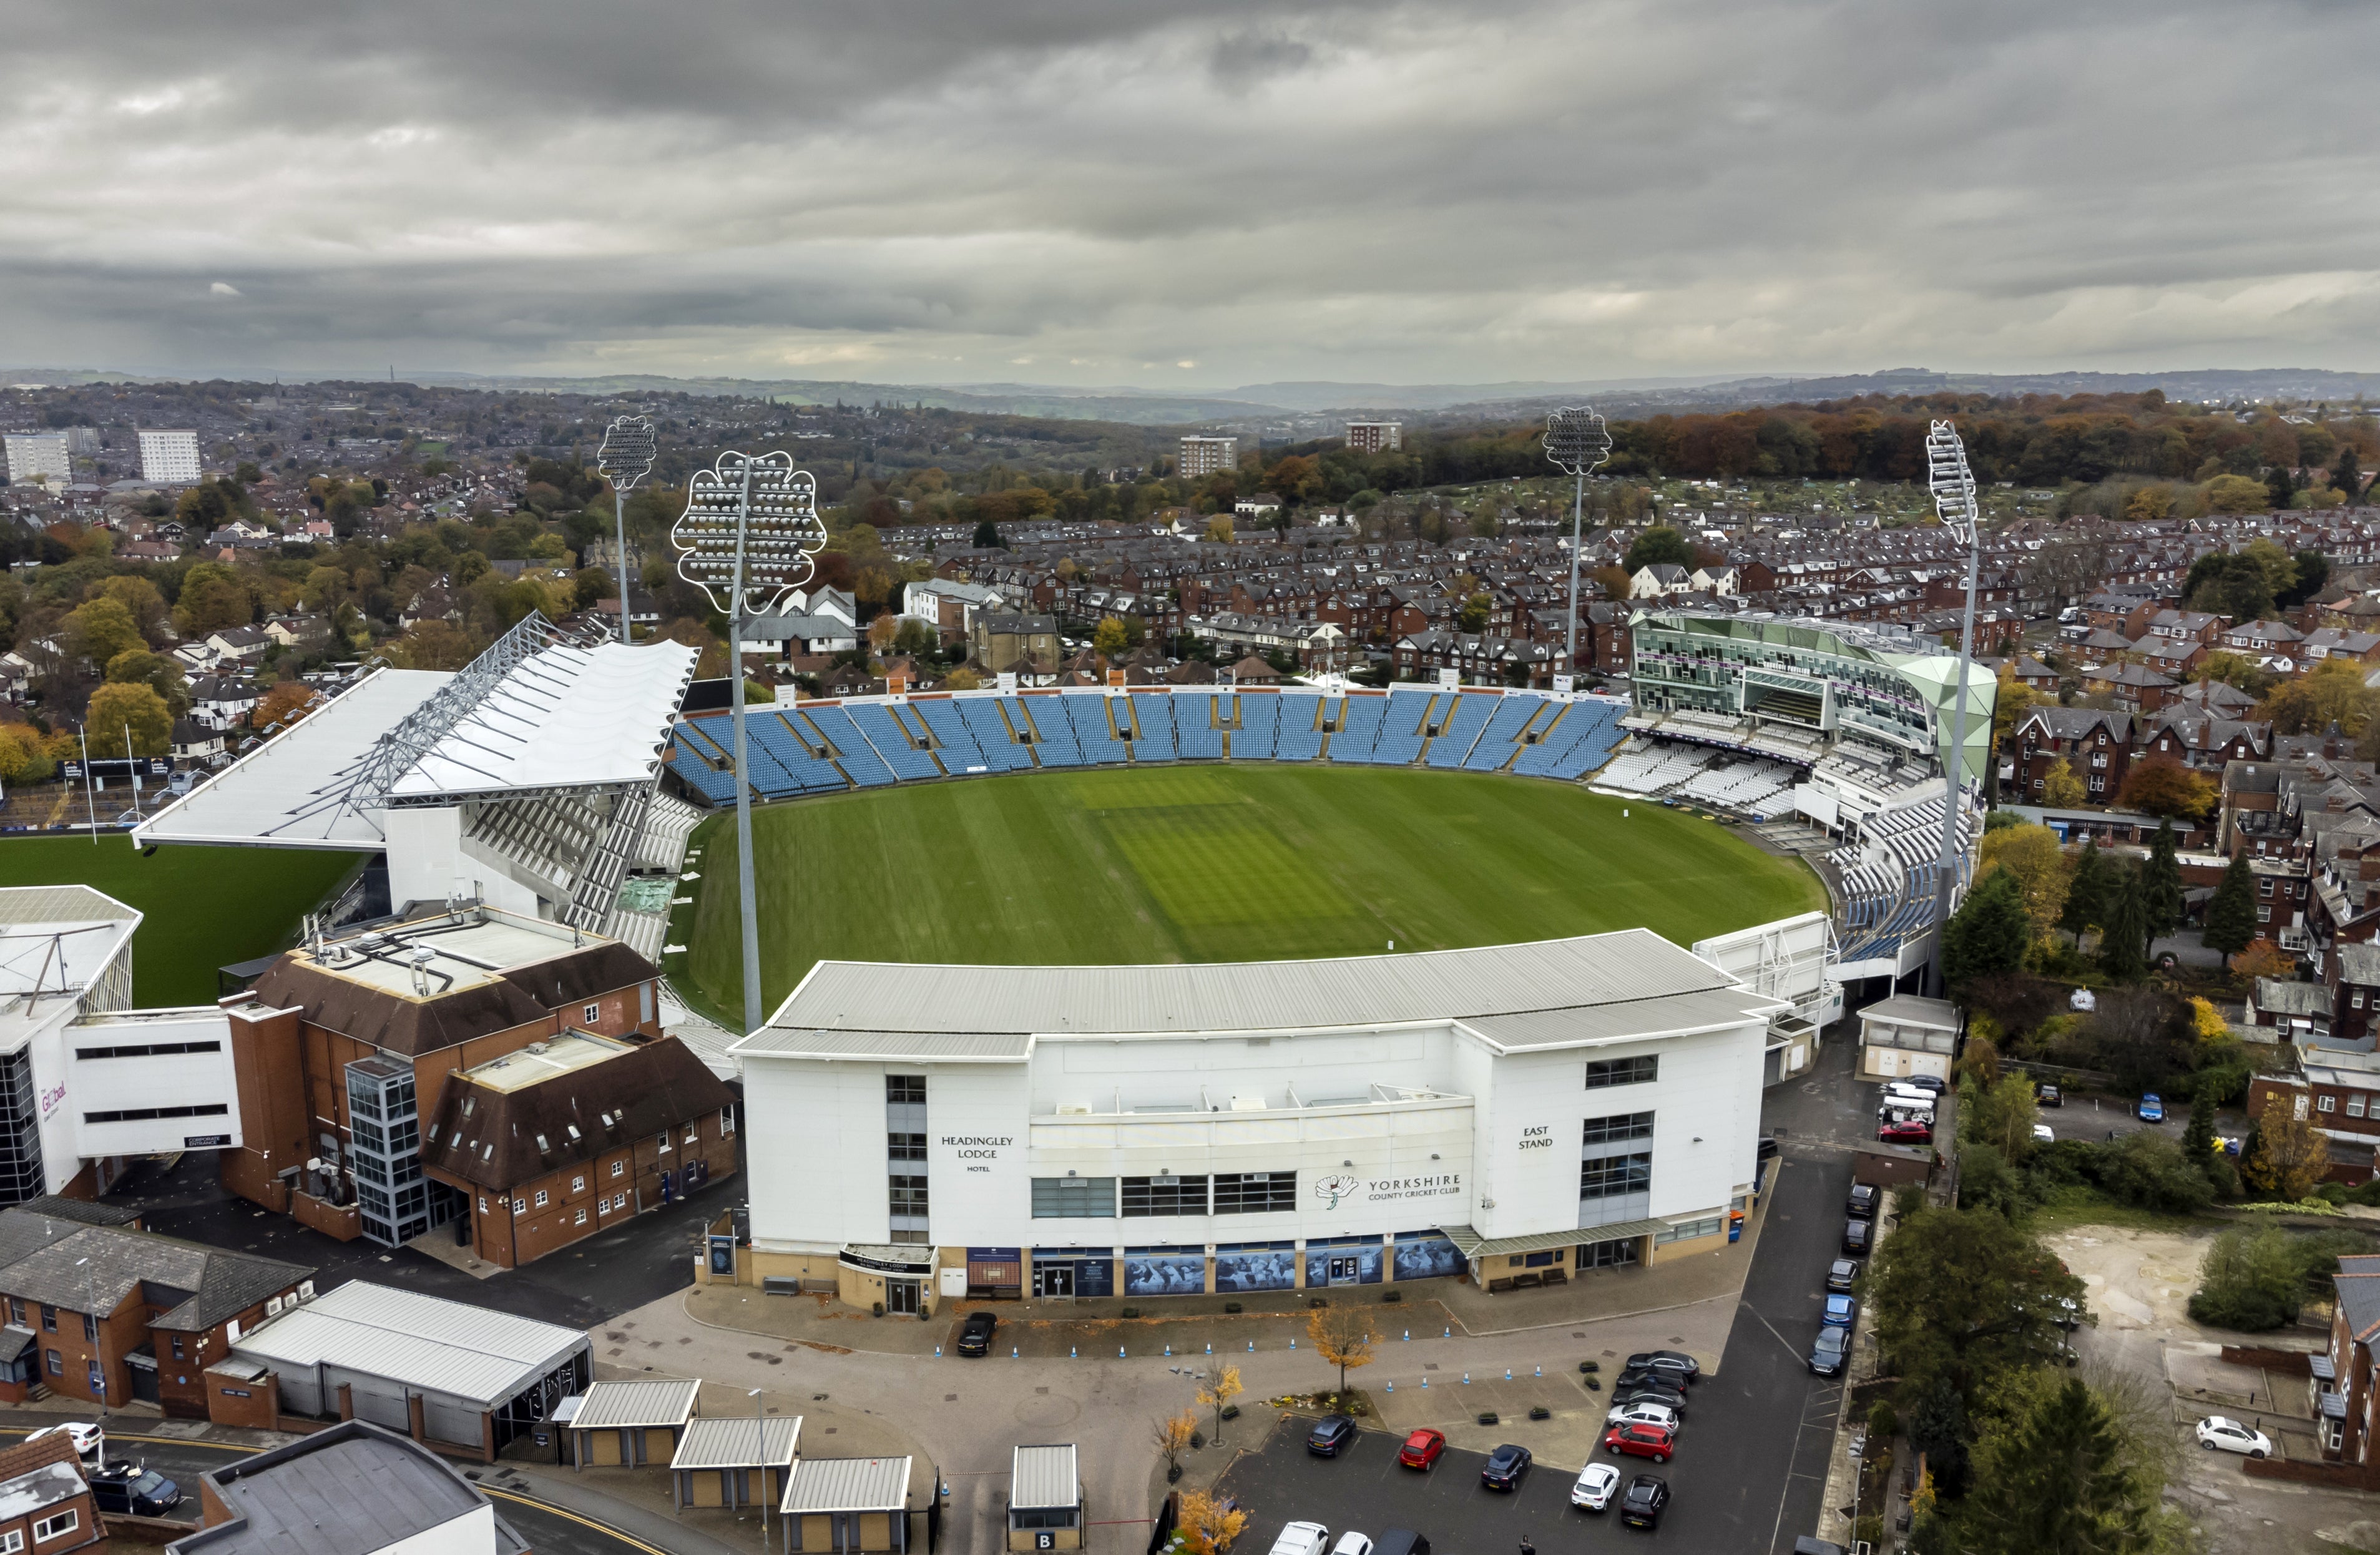 Yorkshire took no disciplinary action following its investigation into Rafiq’s allegations (Danny Lawson/PA Media)